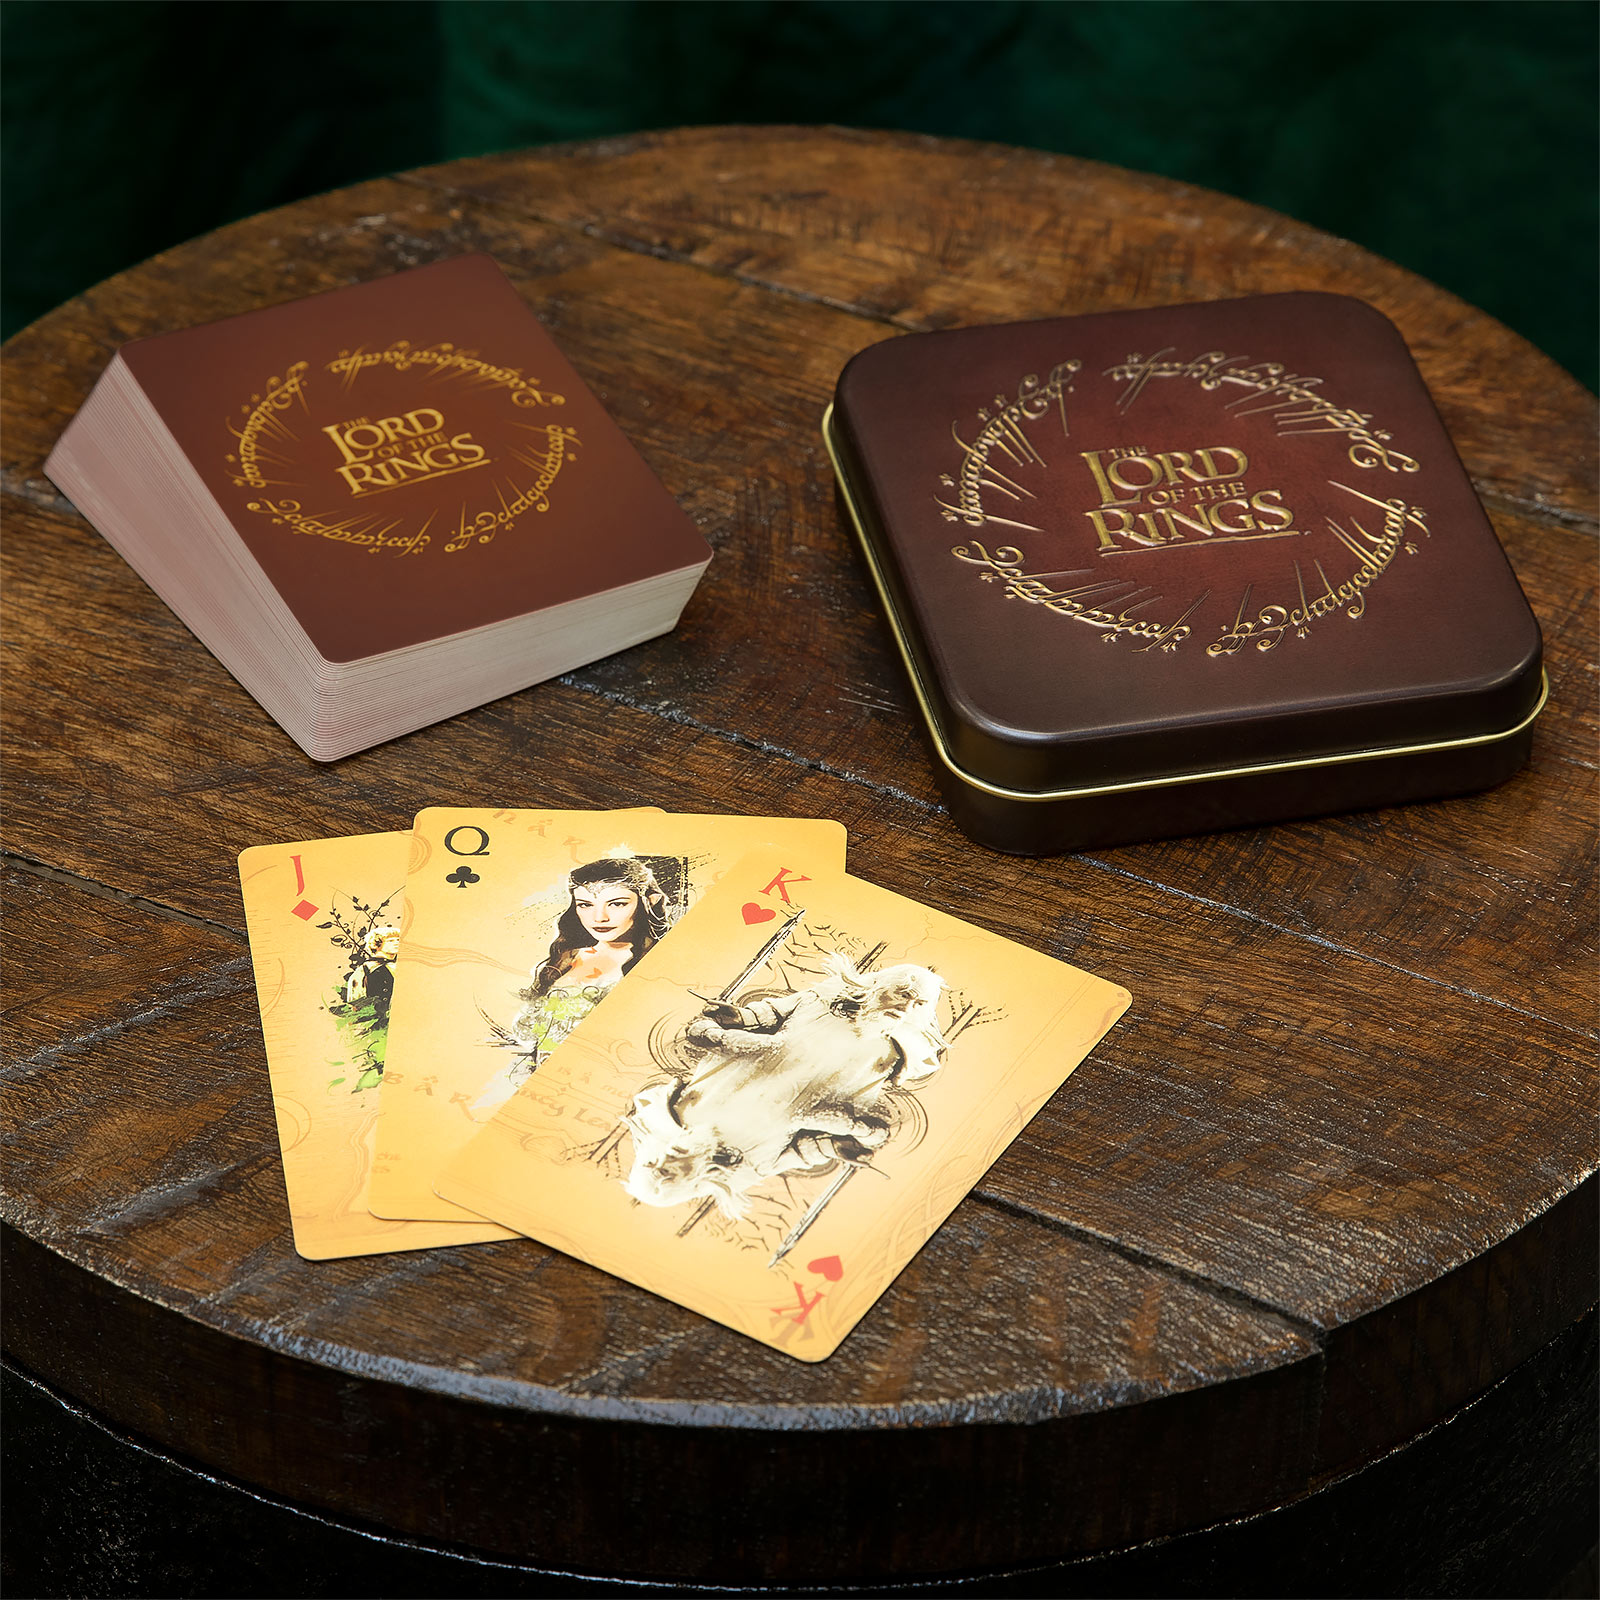 Lord of the Rings Playing Cards in Metal Box